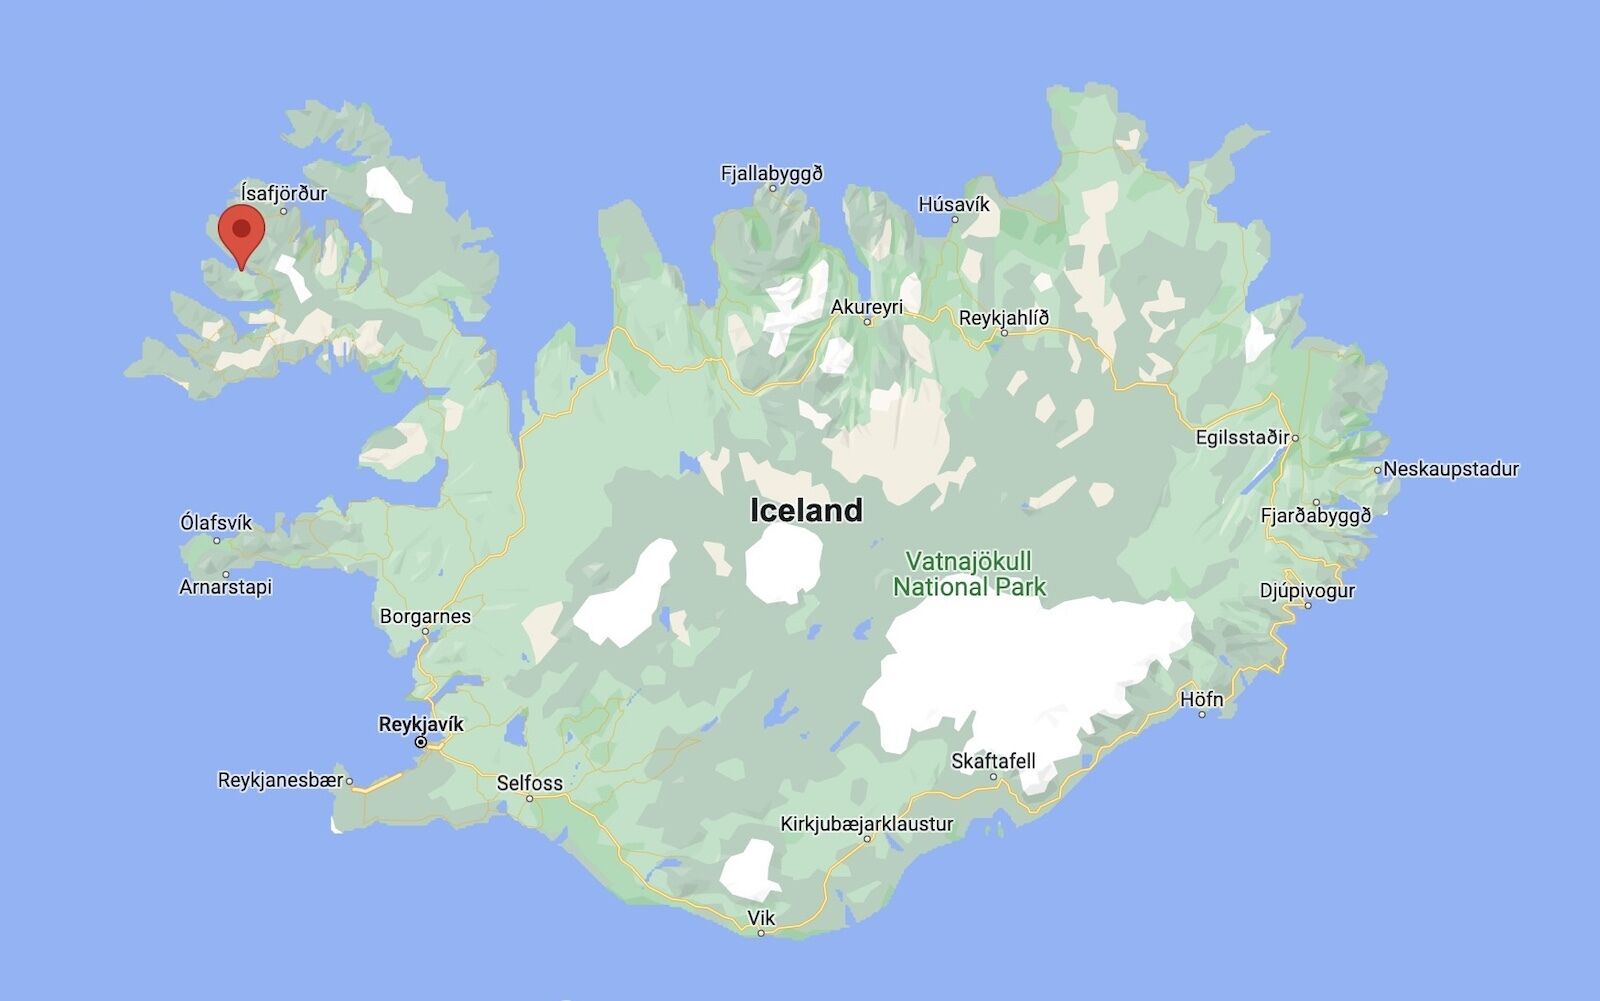 map of Iceland showing the village of Thingeyri where a music festival will take place in April 2022